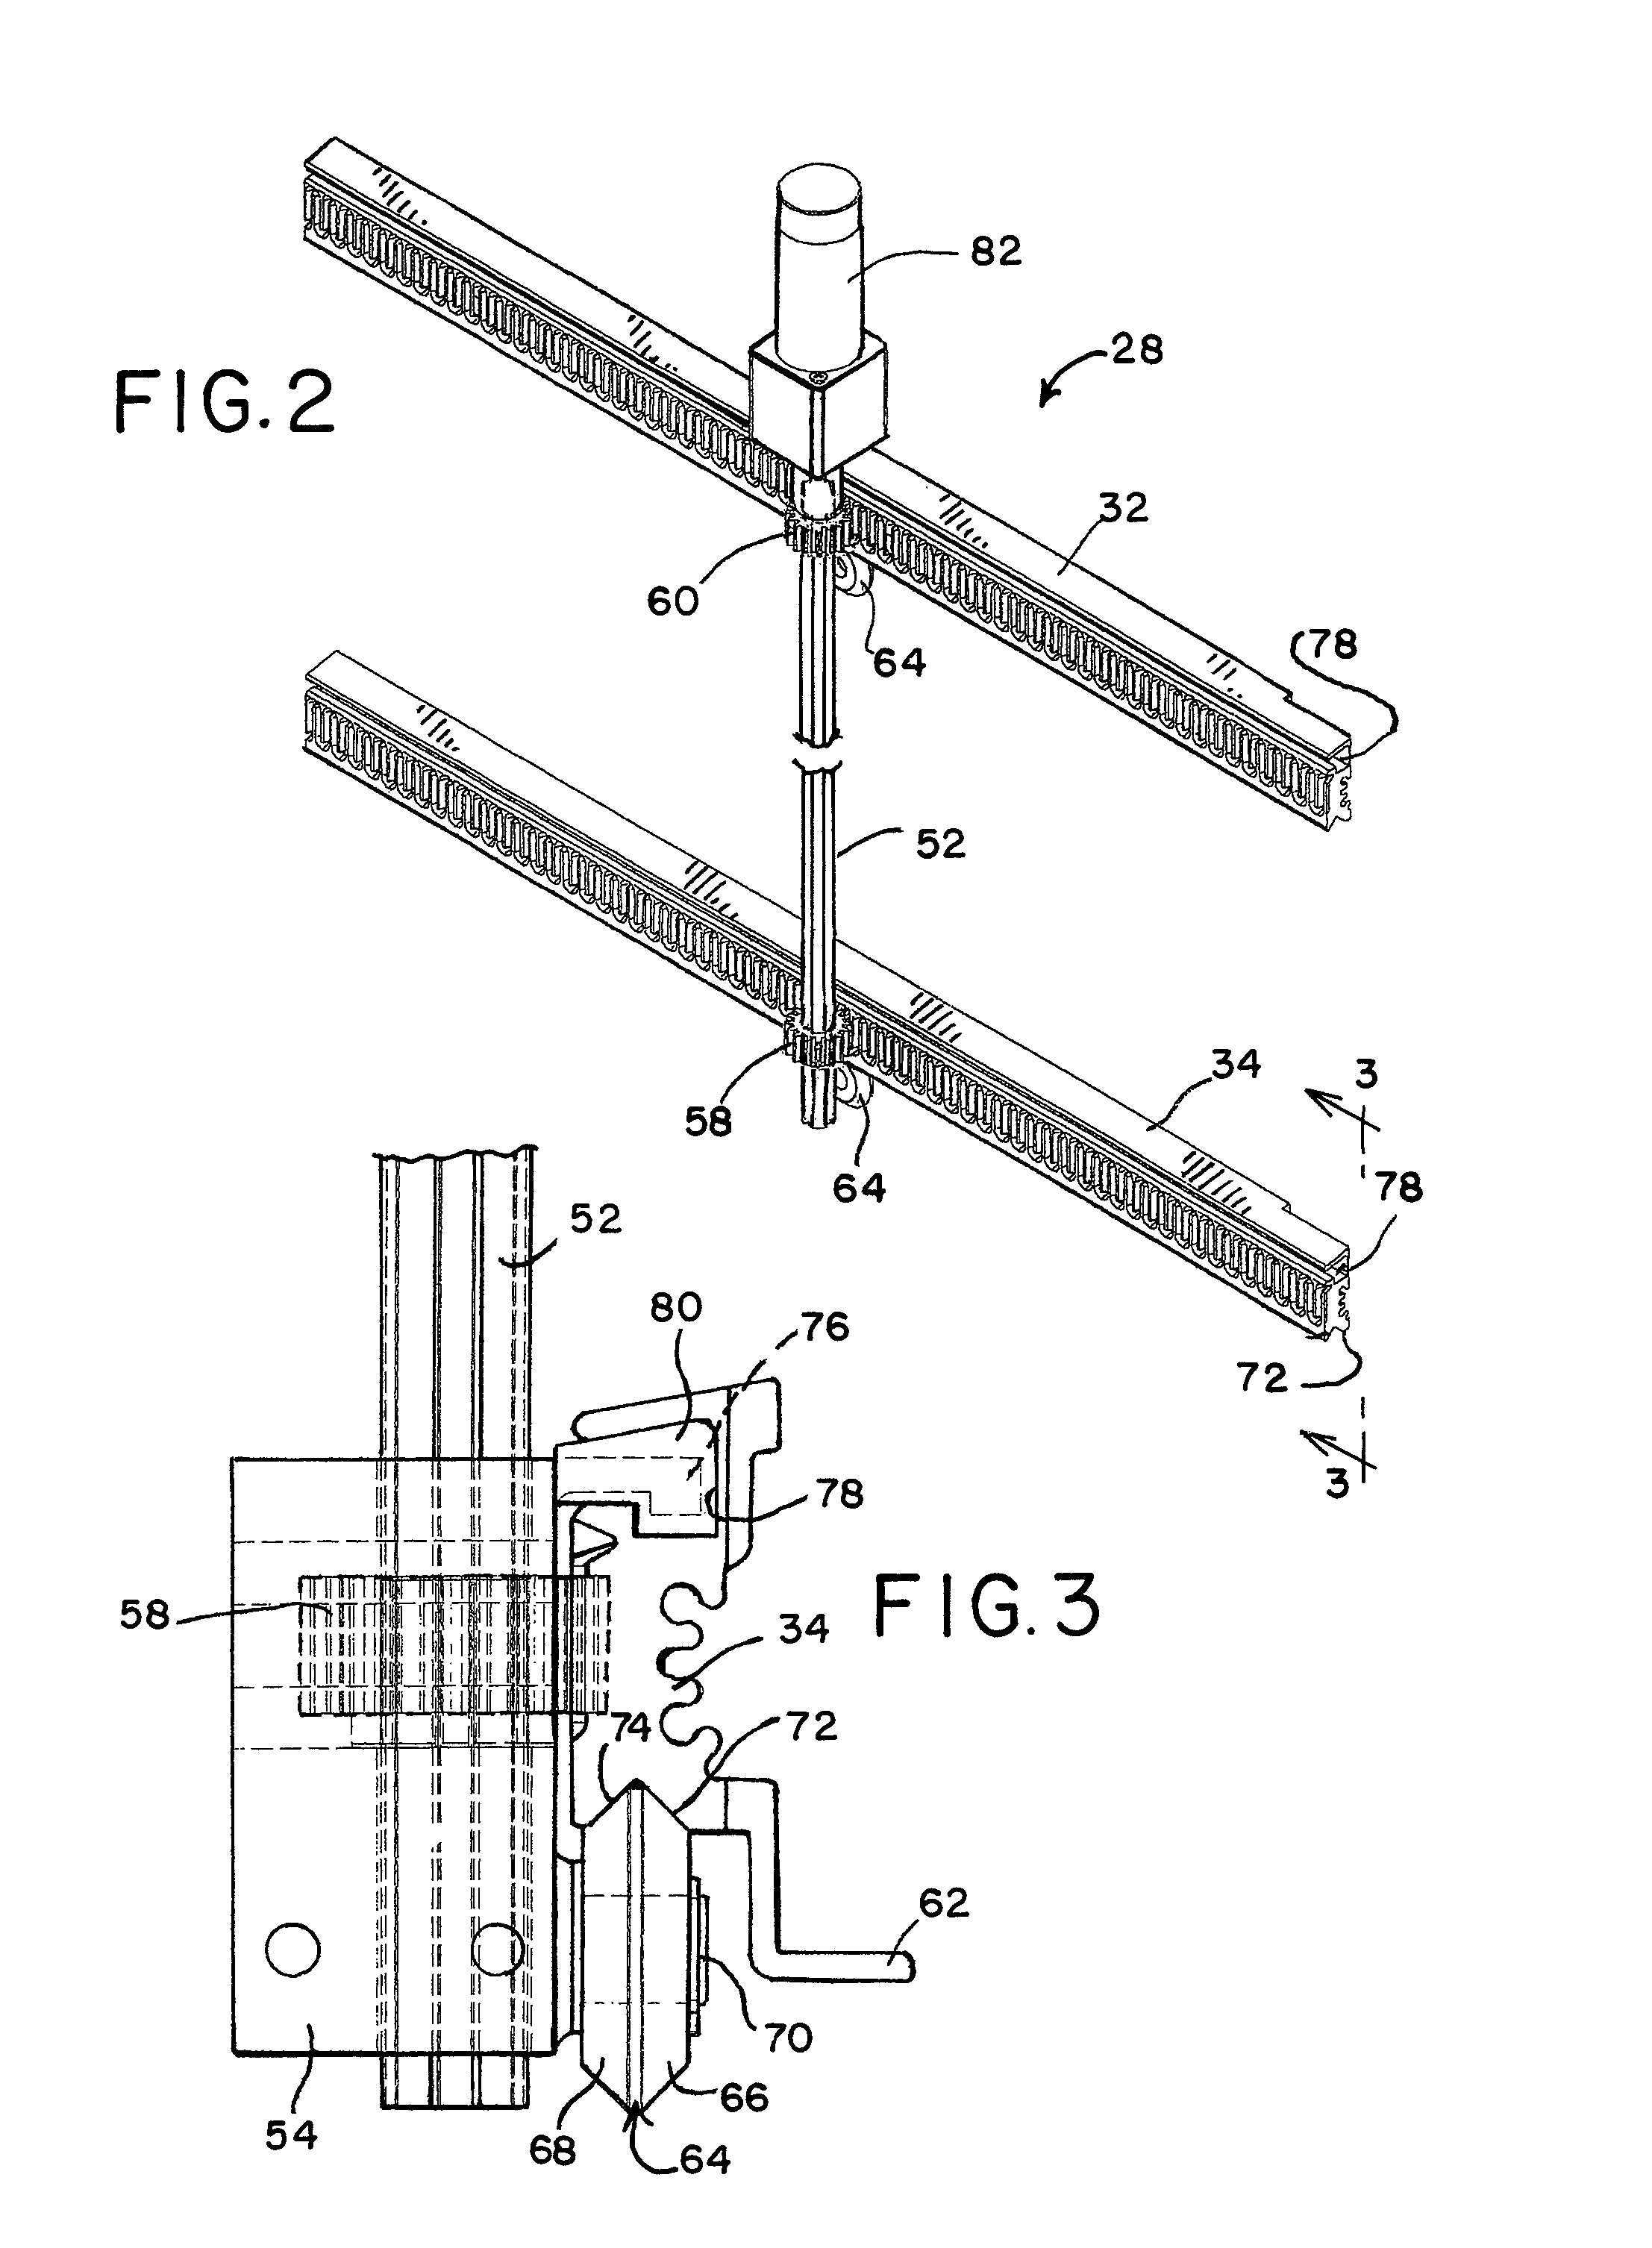 Retractable room actuation assembly for recreational vehicle